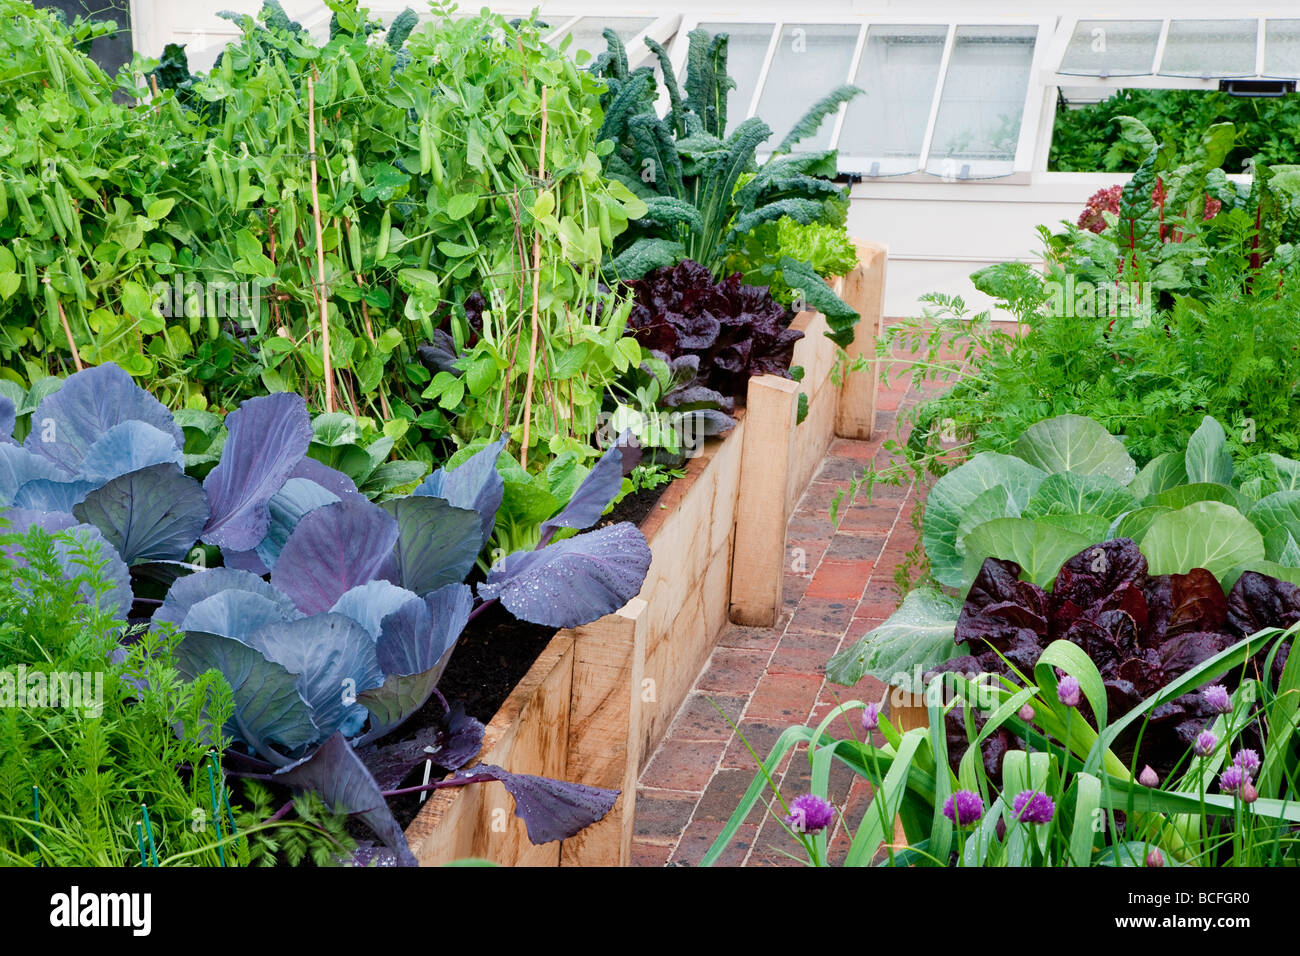 Vegetable garden and greenhouse Marston Langinger Includes peas cabages carrots ruby chard and chives Stock Photo